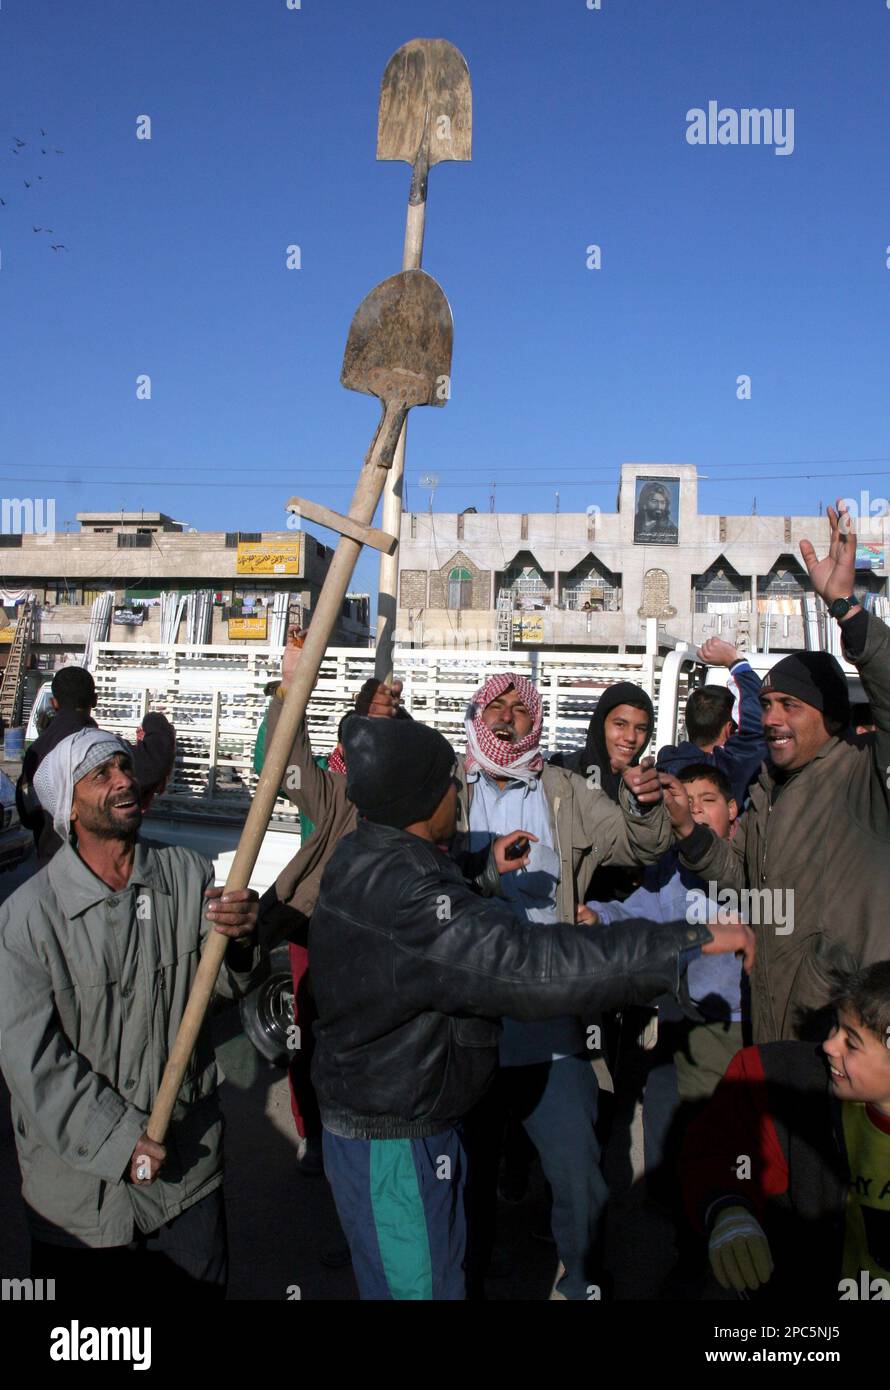 Iraqis celebrate after hearing news of the former Iraqi president Saddam Hussein being executed in Baghdad's Shiite slum of Sadr City, Iraq, Saturday, Dec. 30, 2006. Saddam Hussein, the dictator who ruled Iraq with a remorseless brutality for a quarter-century and was driven from power by a U.S.-led war that left his country in shambles, was taken to the gallows and executed Saturday. (AP Photo/Karim Kadim) Stock Photo